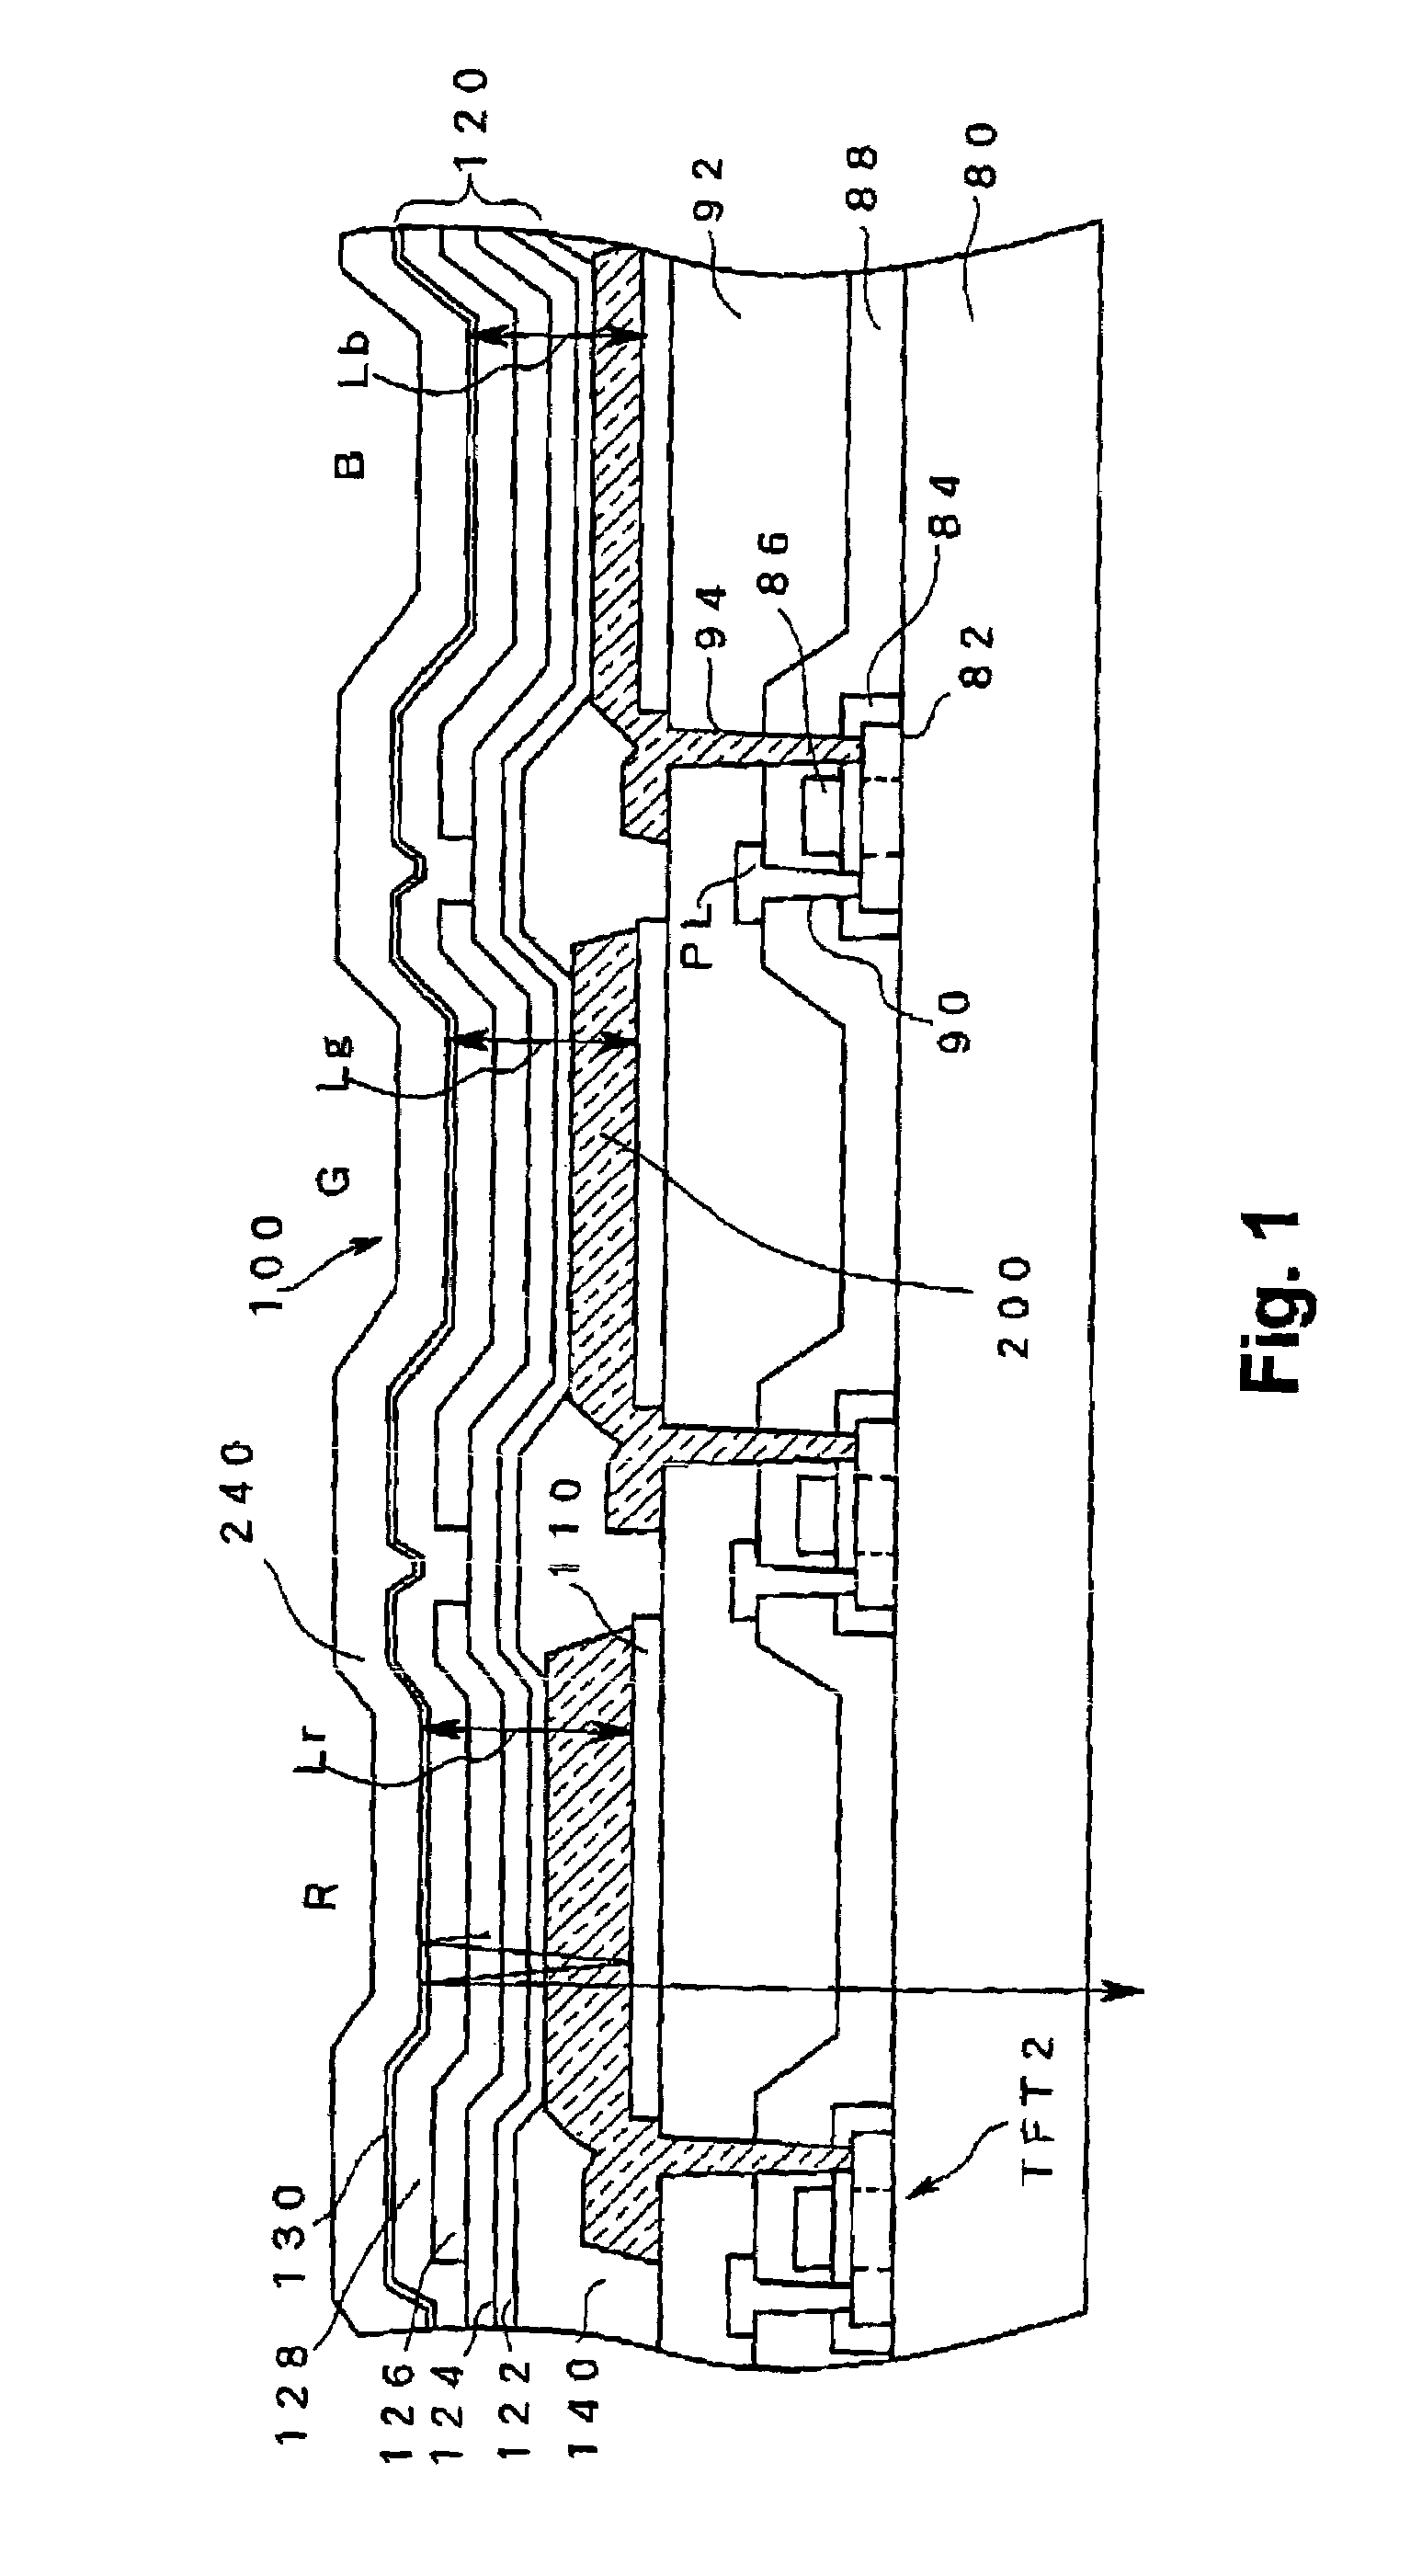 Method for manufacturing display device with conductive resonator spacer layers having different total thicknesses